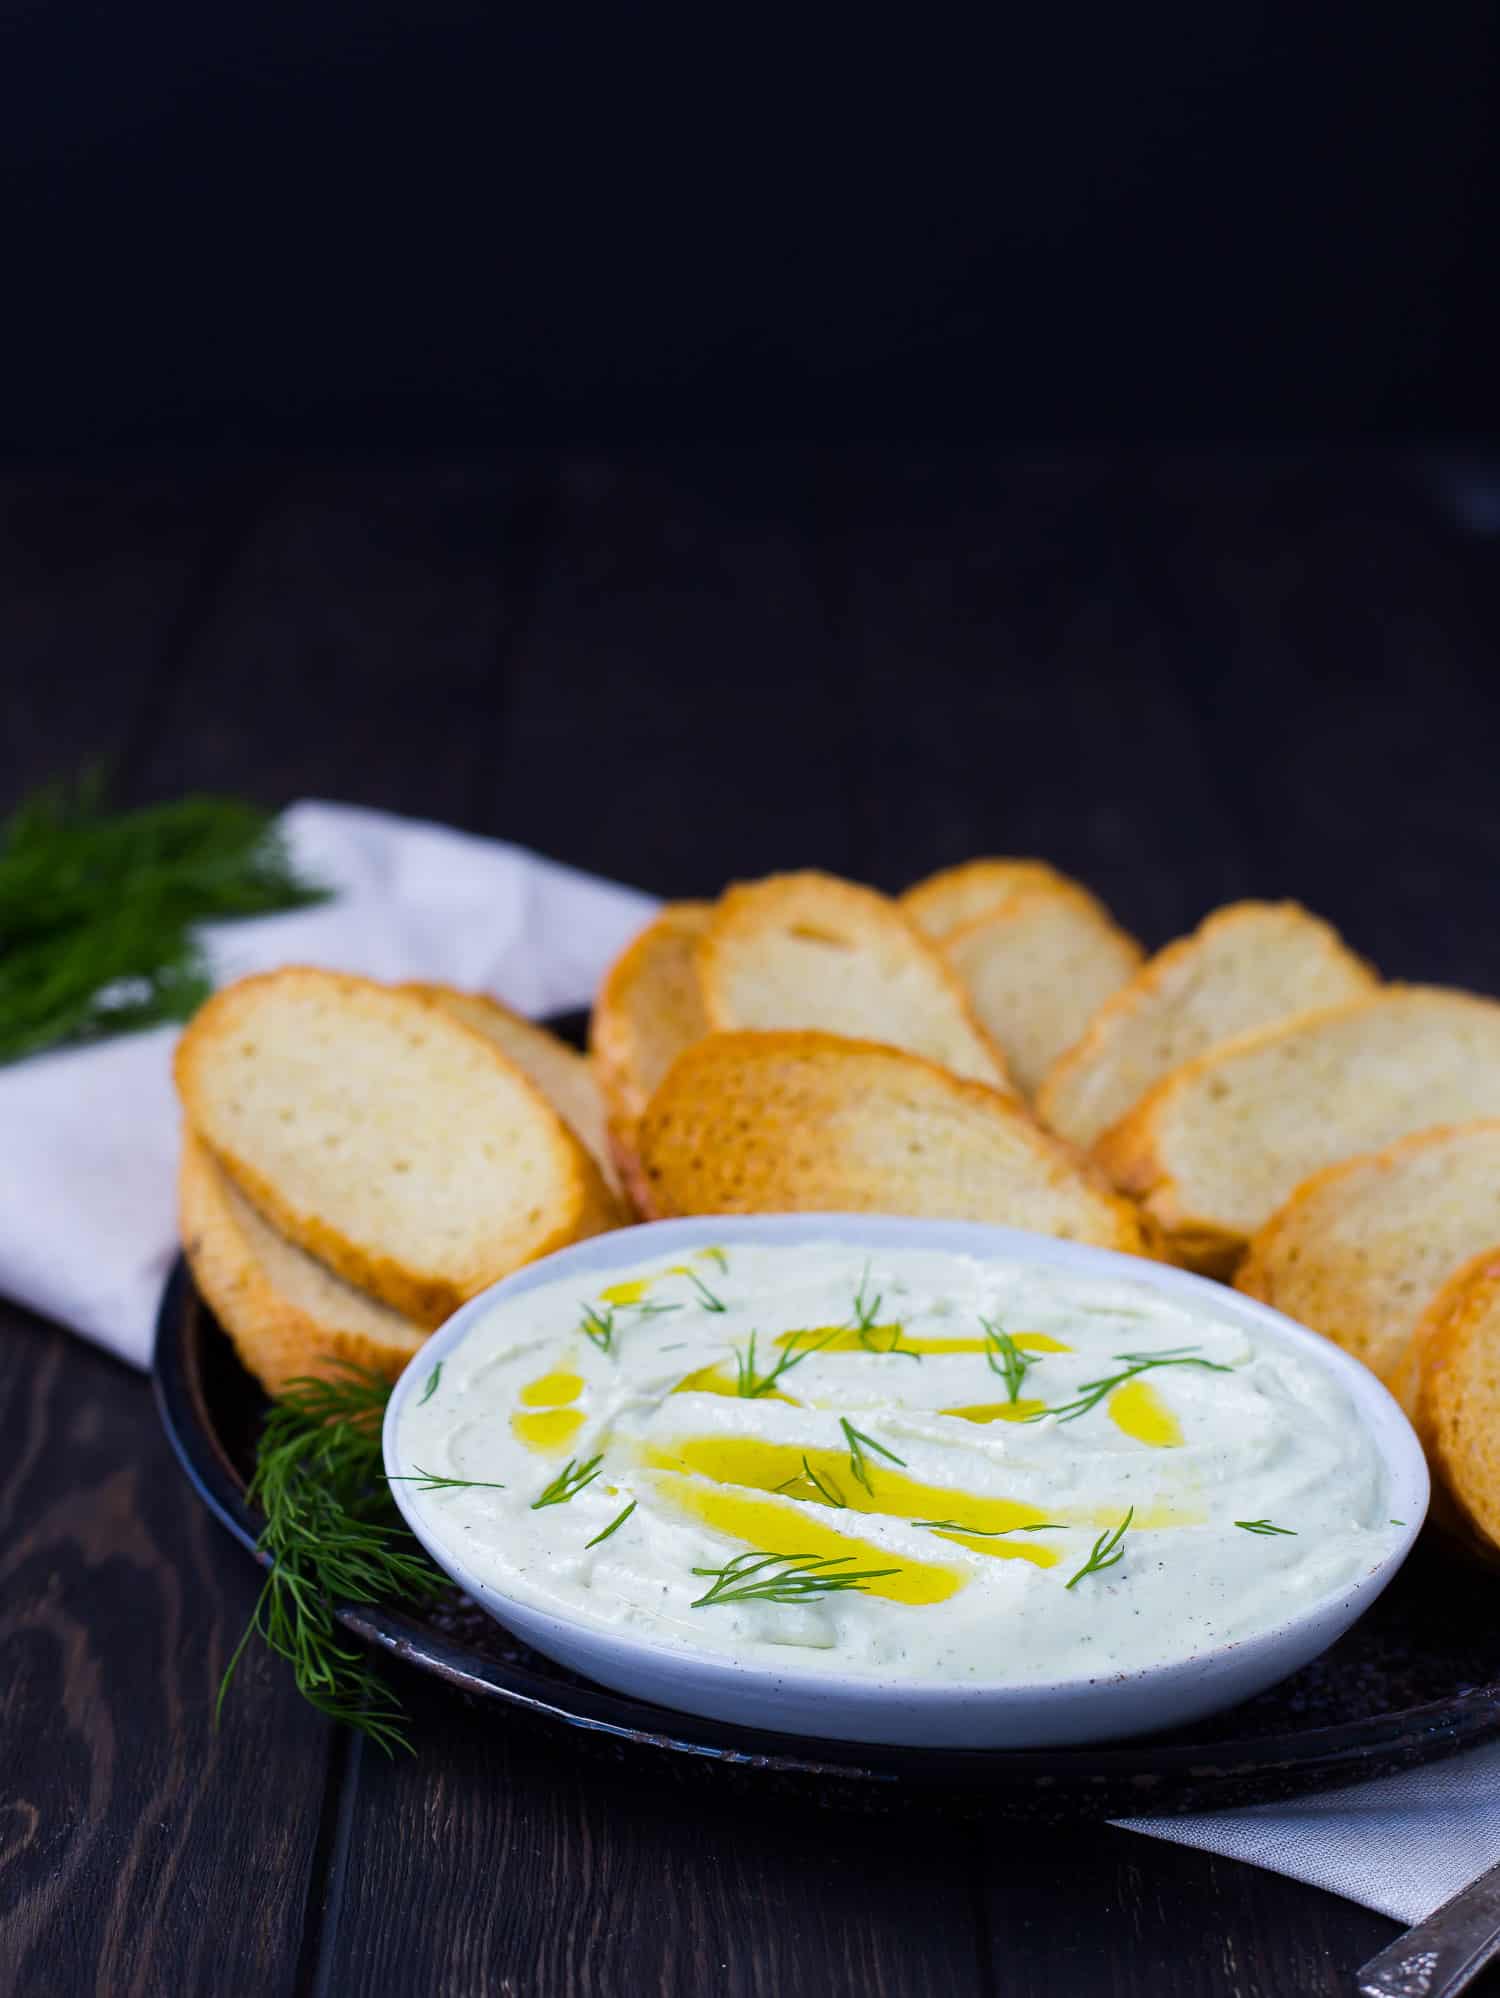 Whipped feta in a shallow bowl, surrounded by crostini, black background.